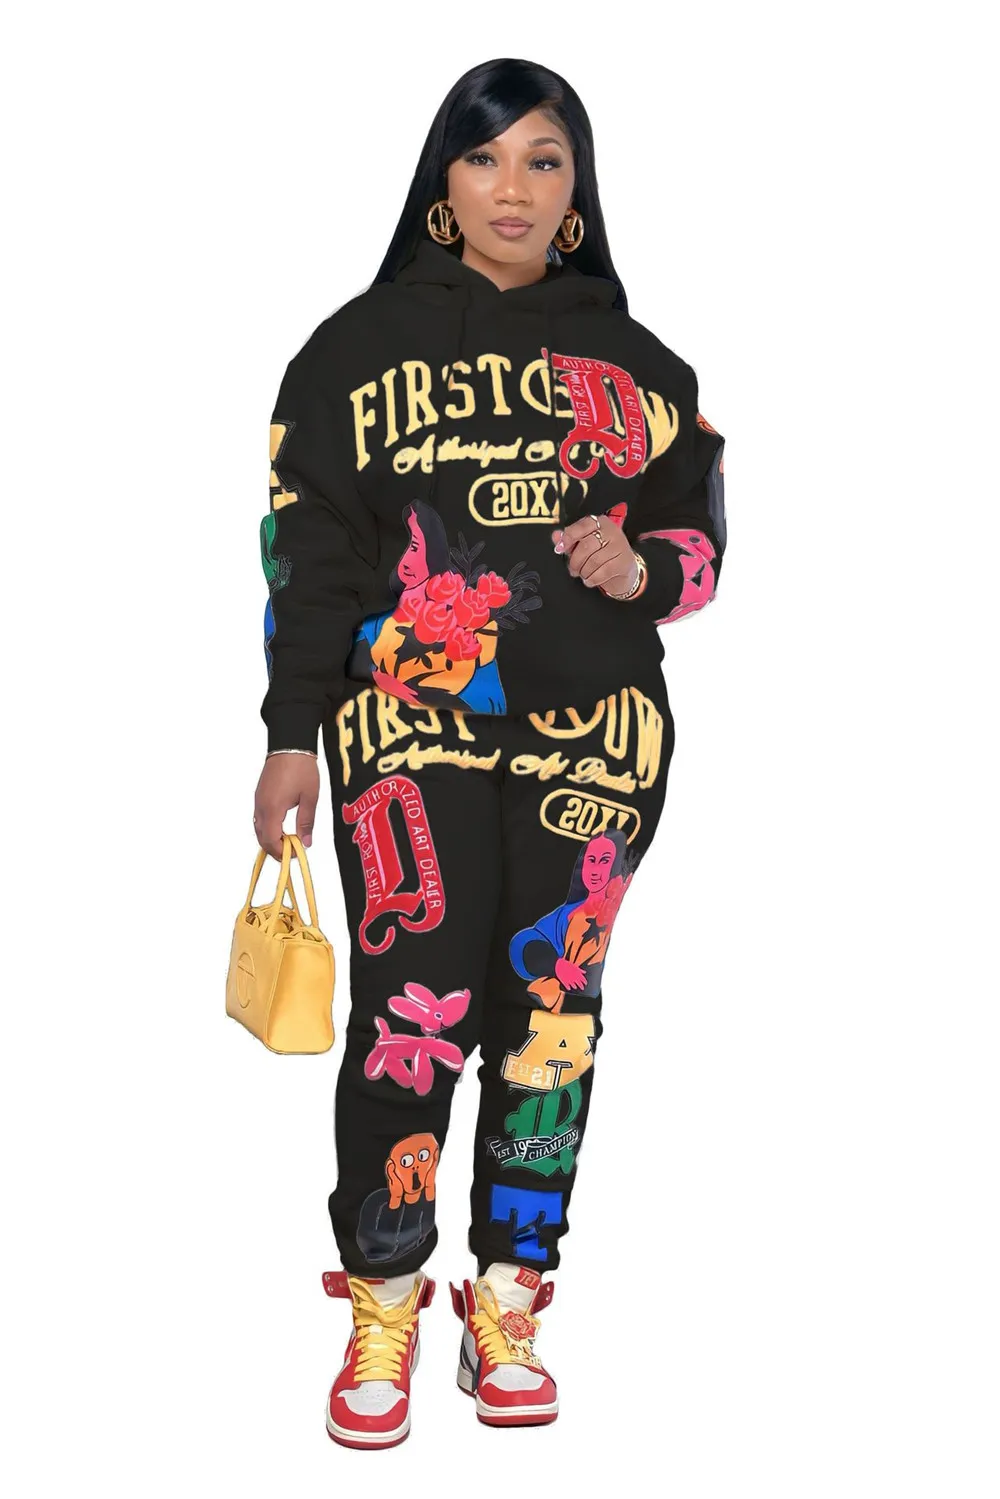 Sweatpants and Sweatshirt Set Womens, Winter Casual 3 Piece Outfit Cute  Printed Sport Suit Tracksuit Jogger Sweatsuit